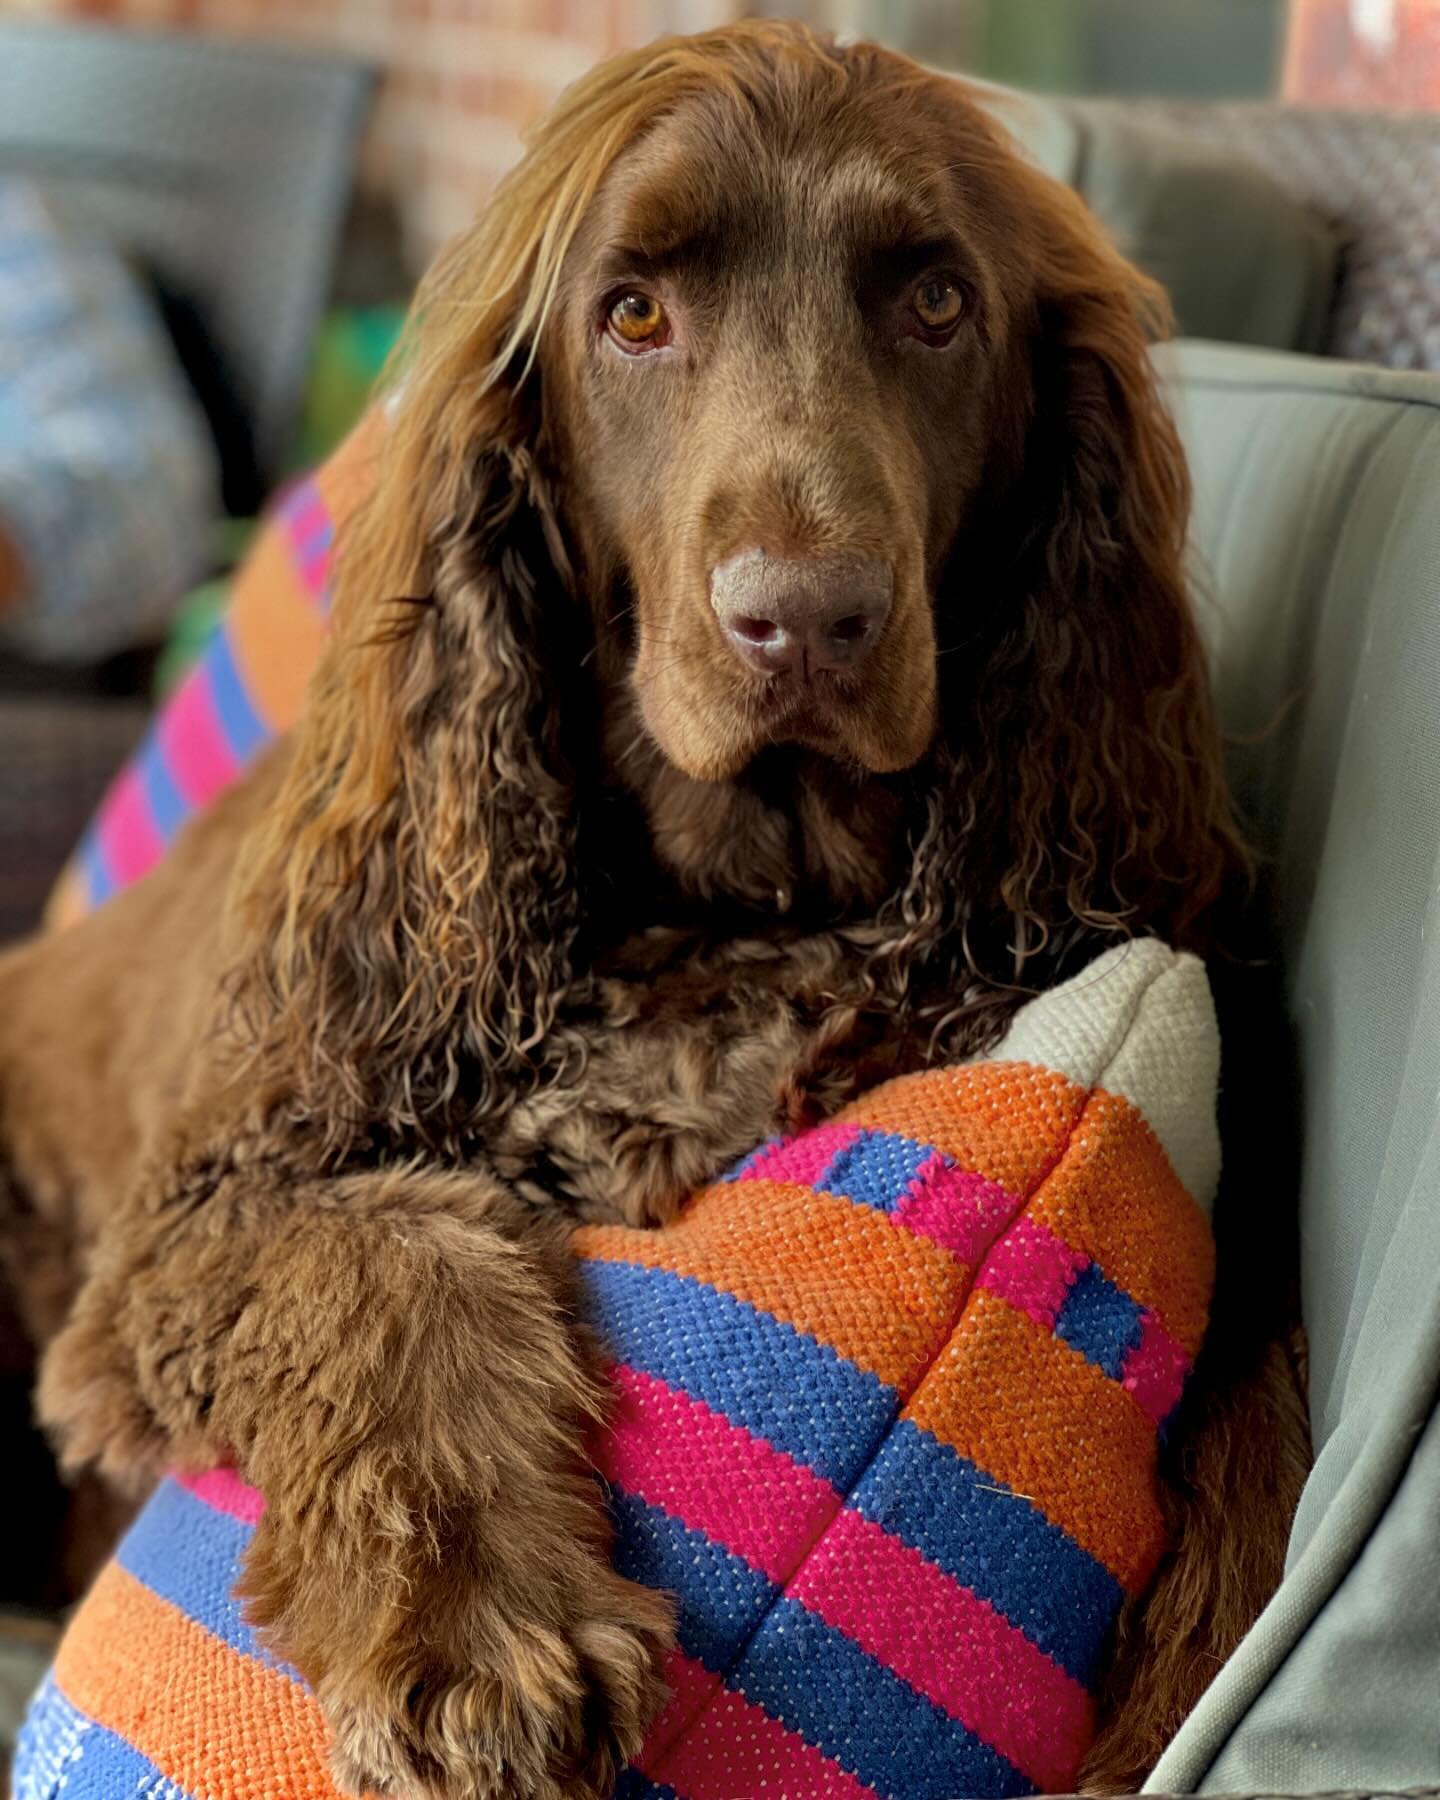 Chill-laxin into the weekend. Apollo is the king of chill, always finding the comfy spot unless there is a ball 🎾 to fetch or swimming 🏊🏻&zwj;♀️ involved. 

#fieldspaniel #fieldspanielsofinstagram #apollo #dog #gooddog #chill #weekendvibes #spanie